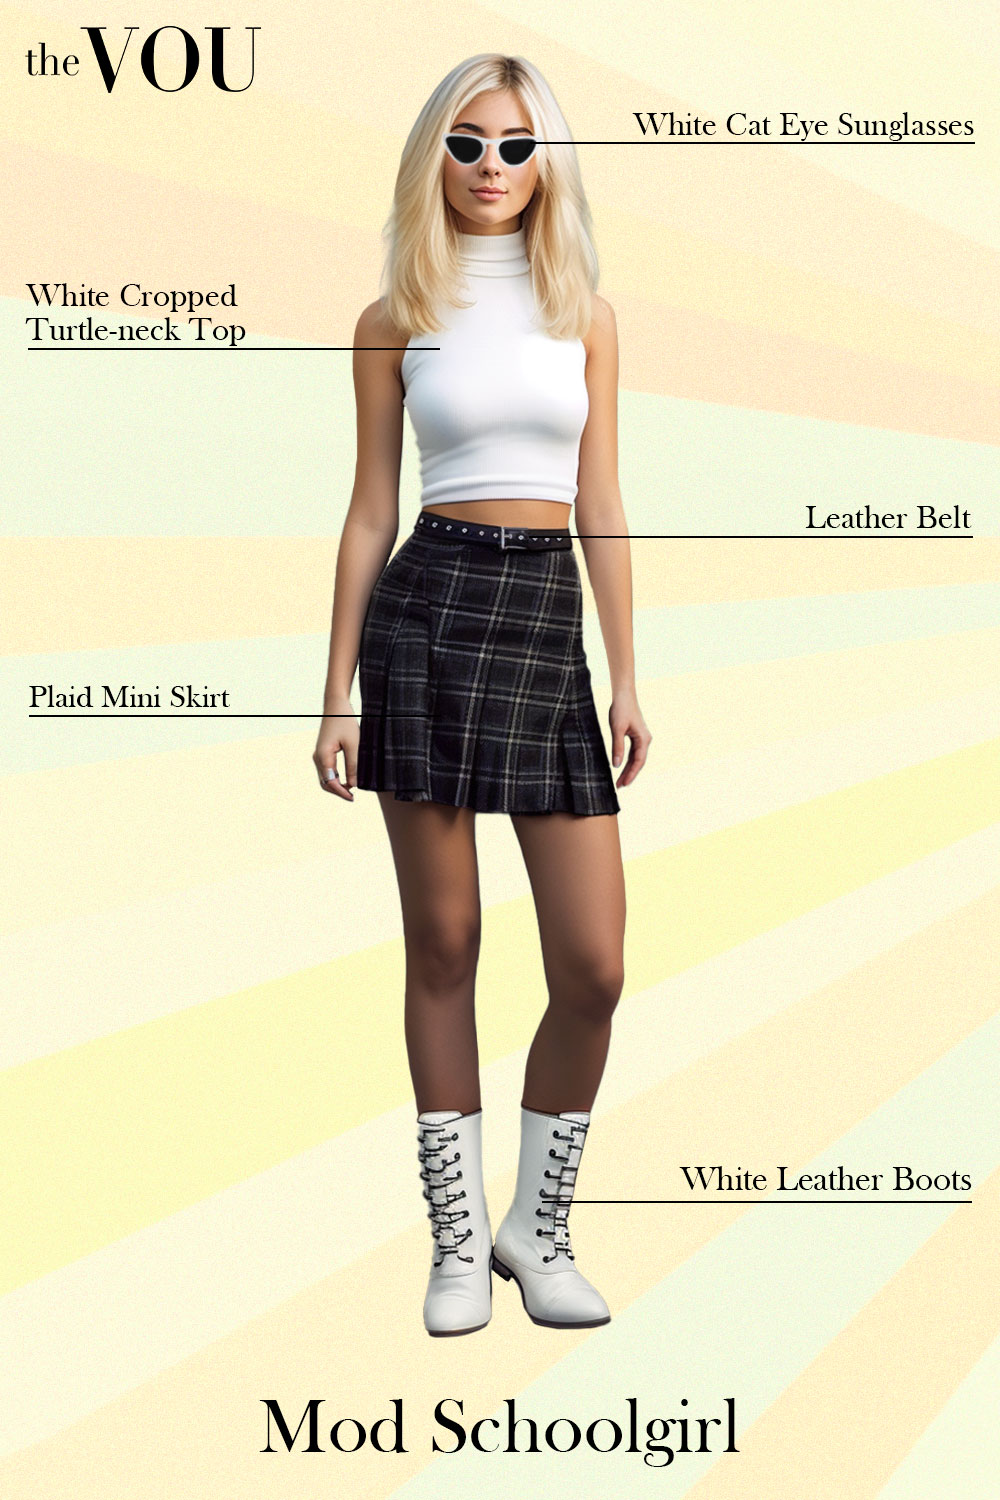 Mod style schoolgirl outfit